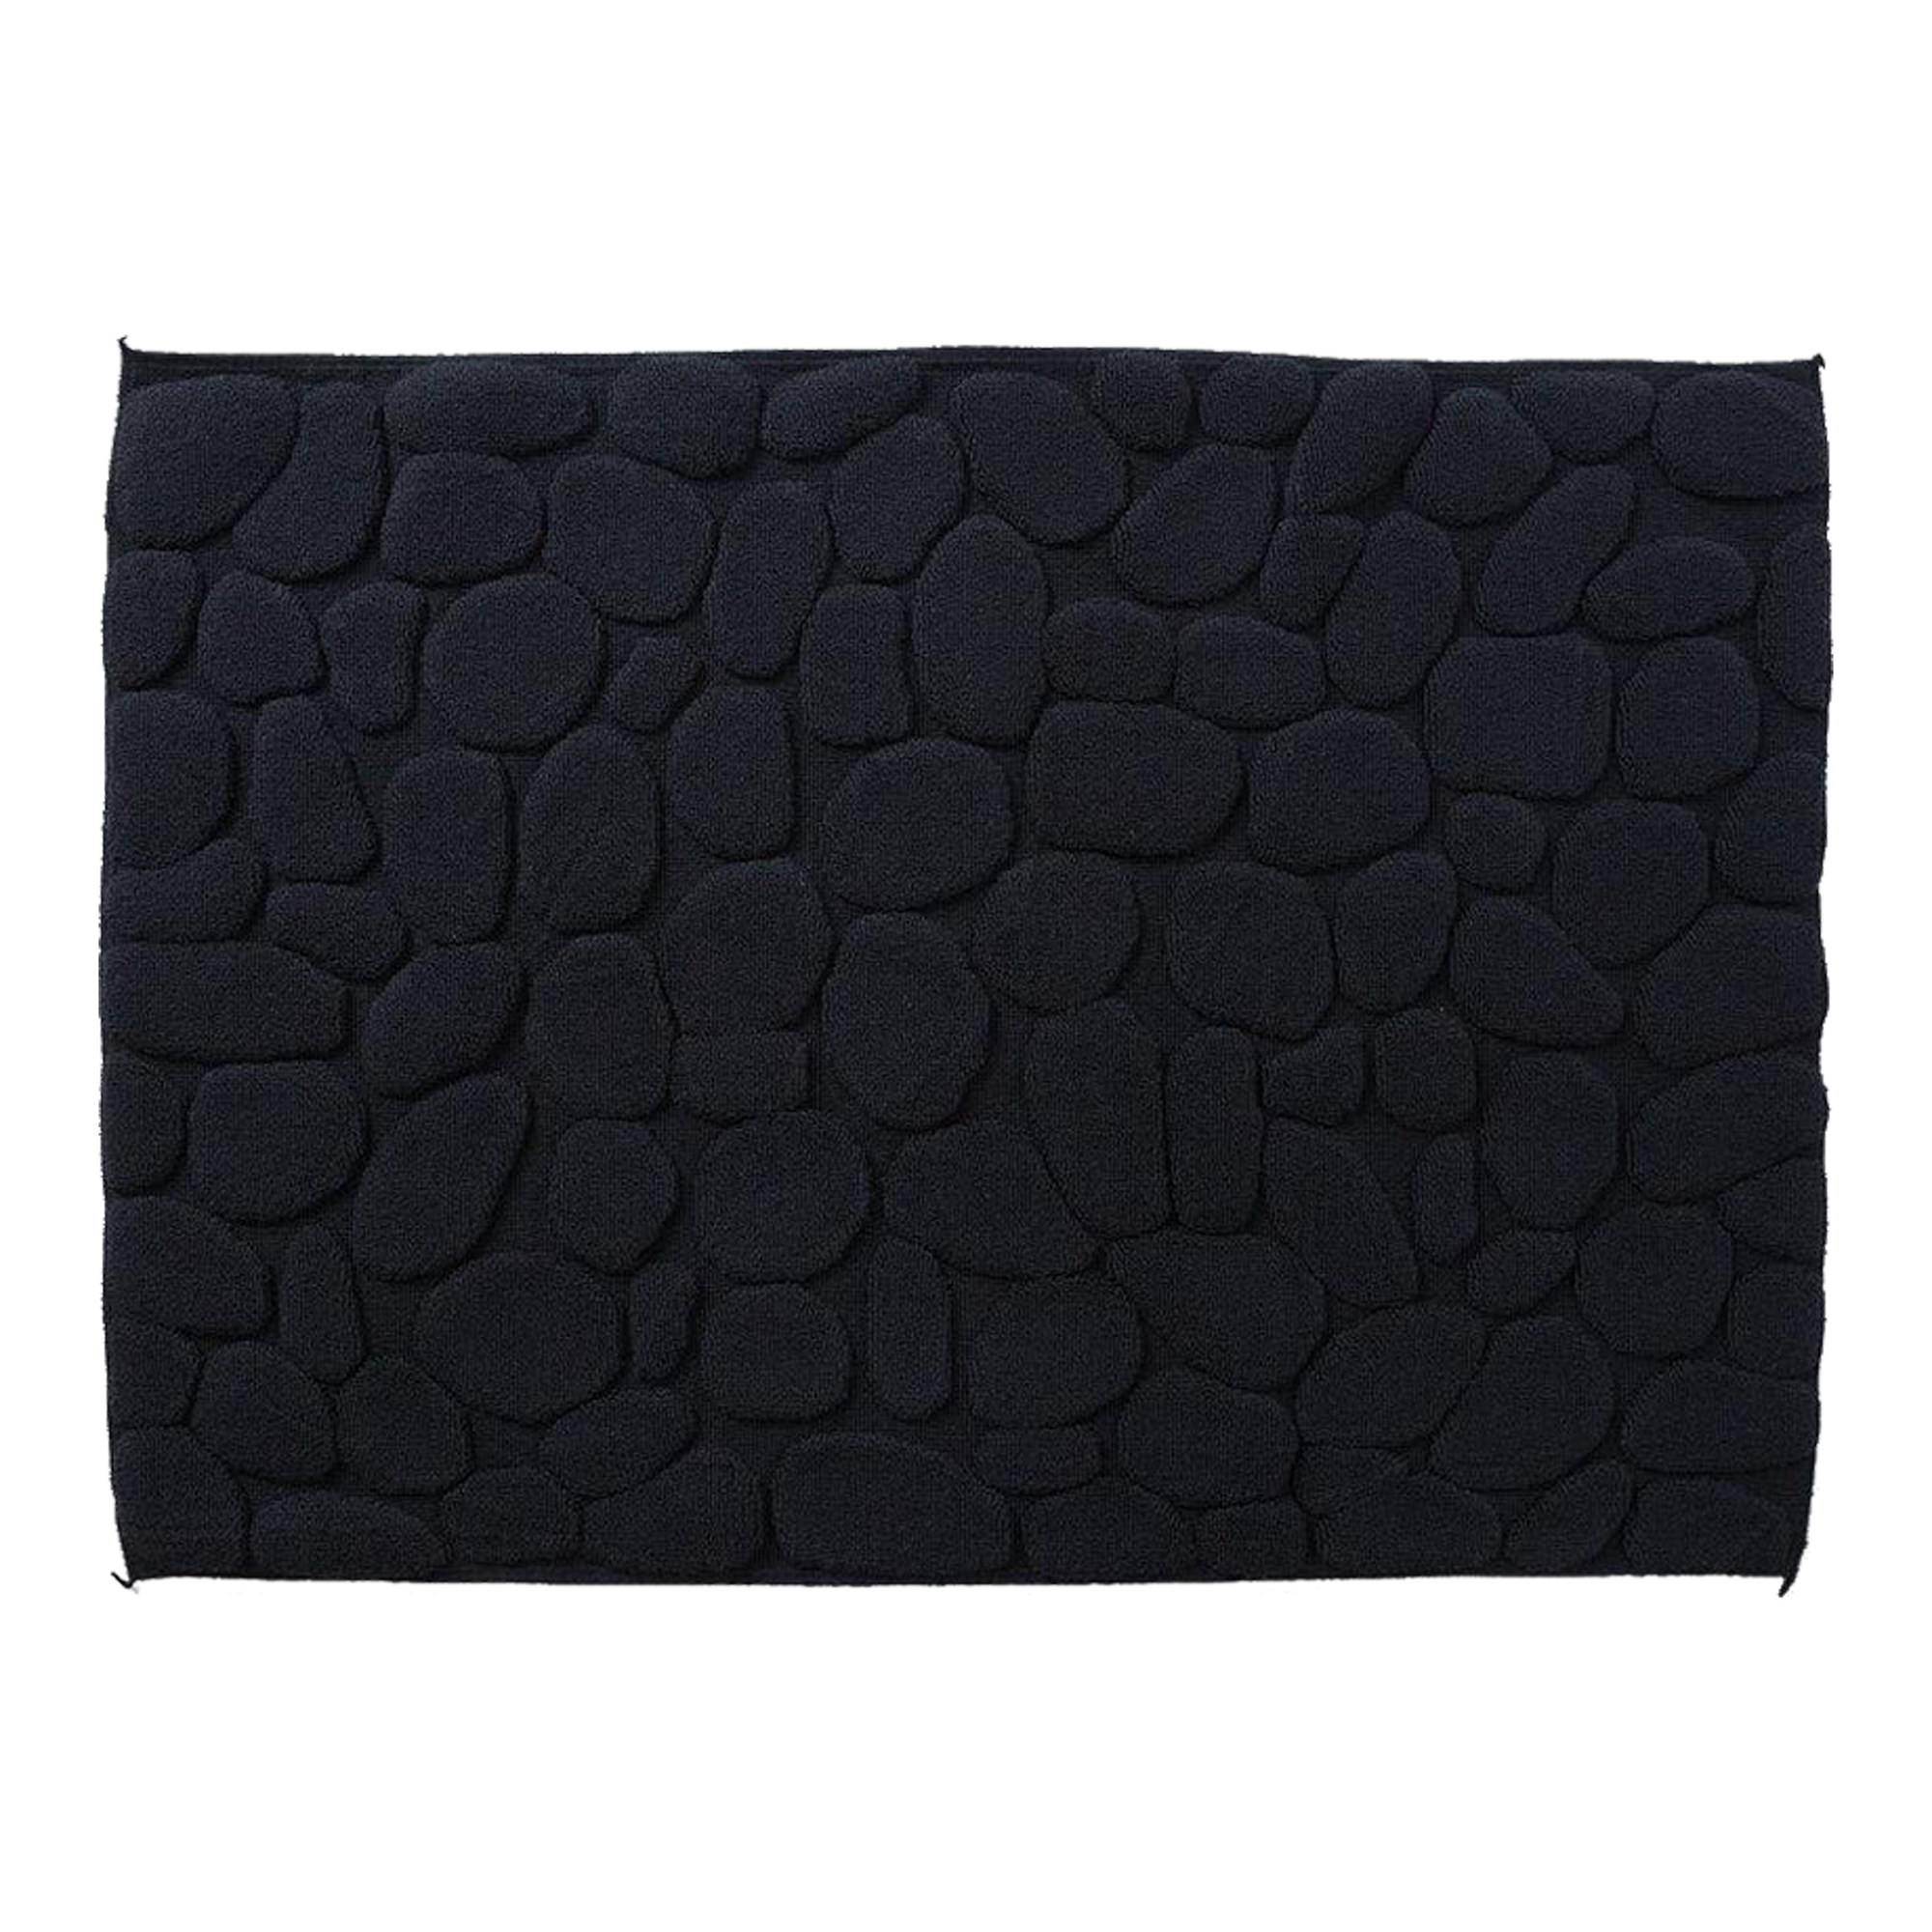 Inspired by the natural stones found in Japanese riverbeds, the Ishikoro Pebble Bath Mat was designed by Masaru Suzki and features a padded texture that feels great under your feet